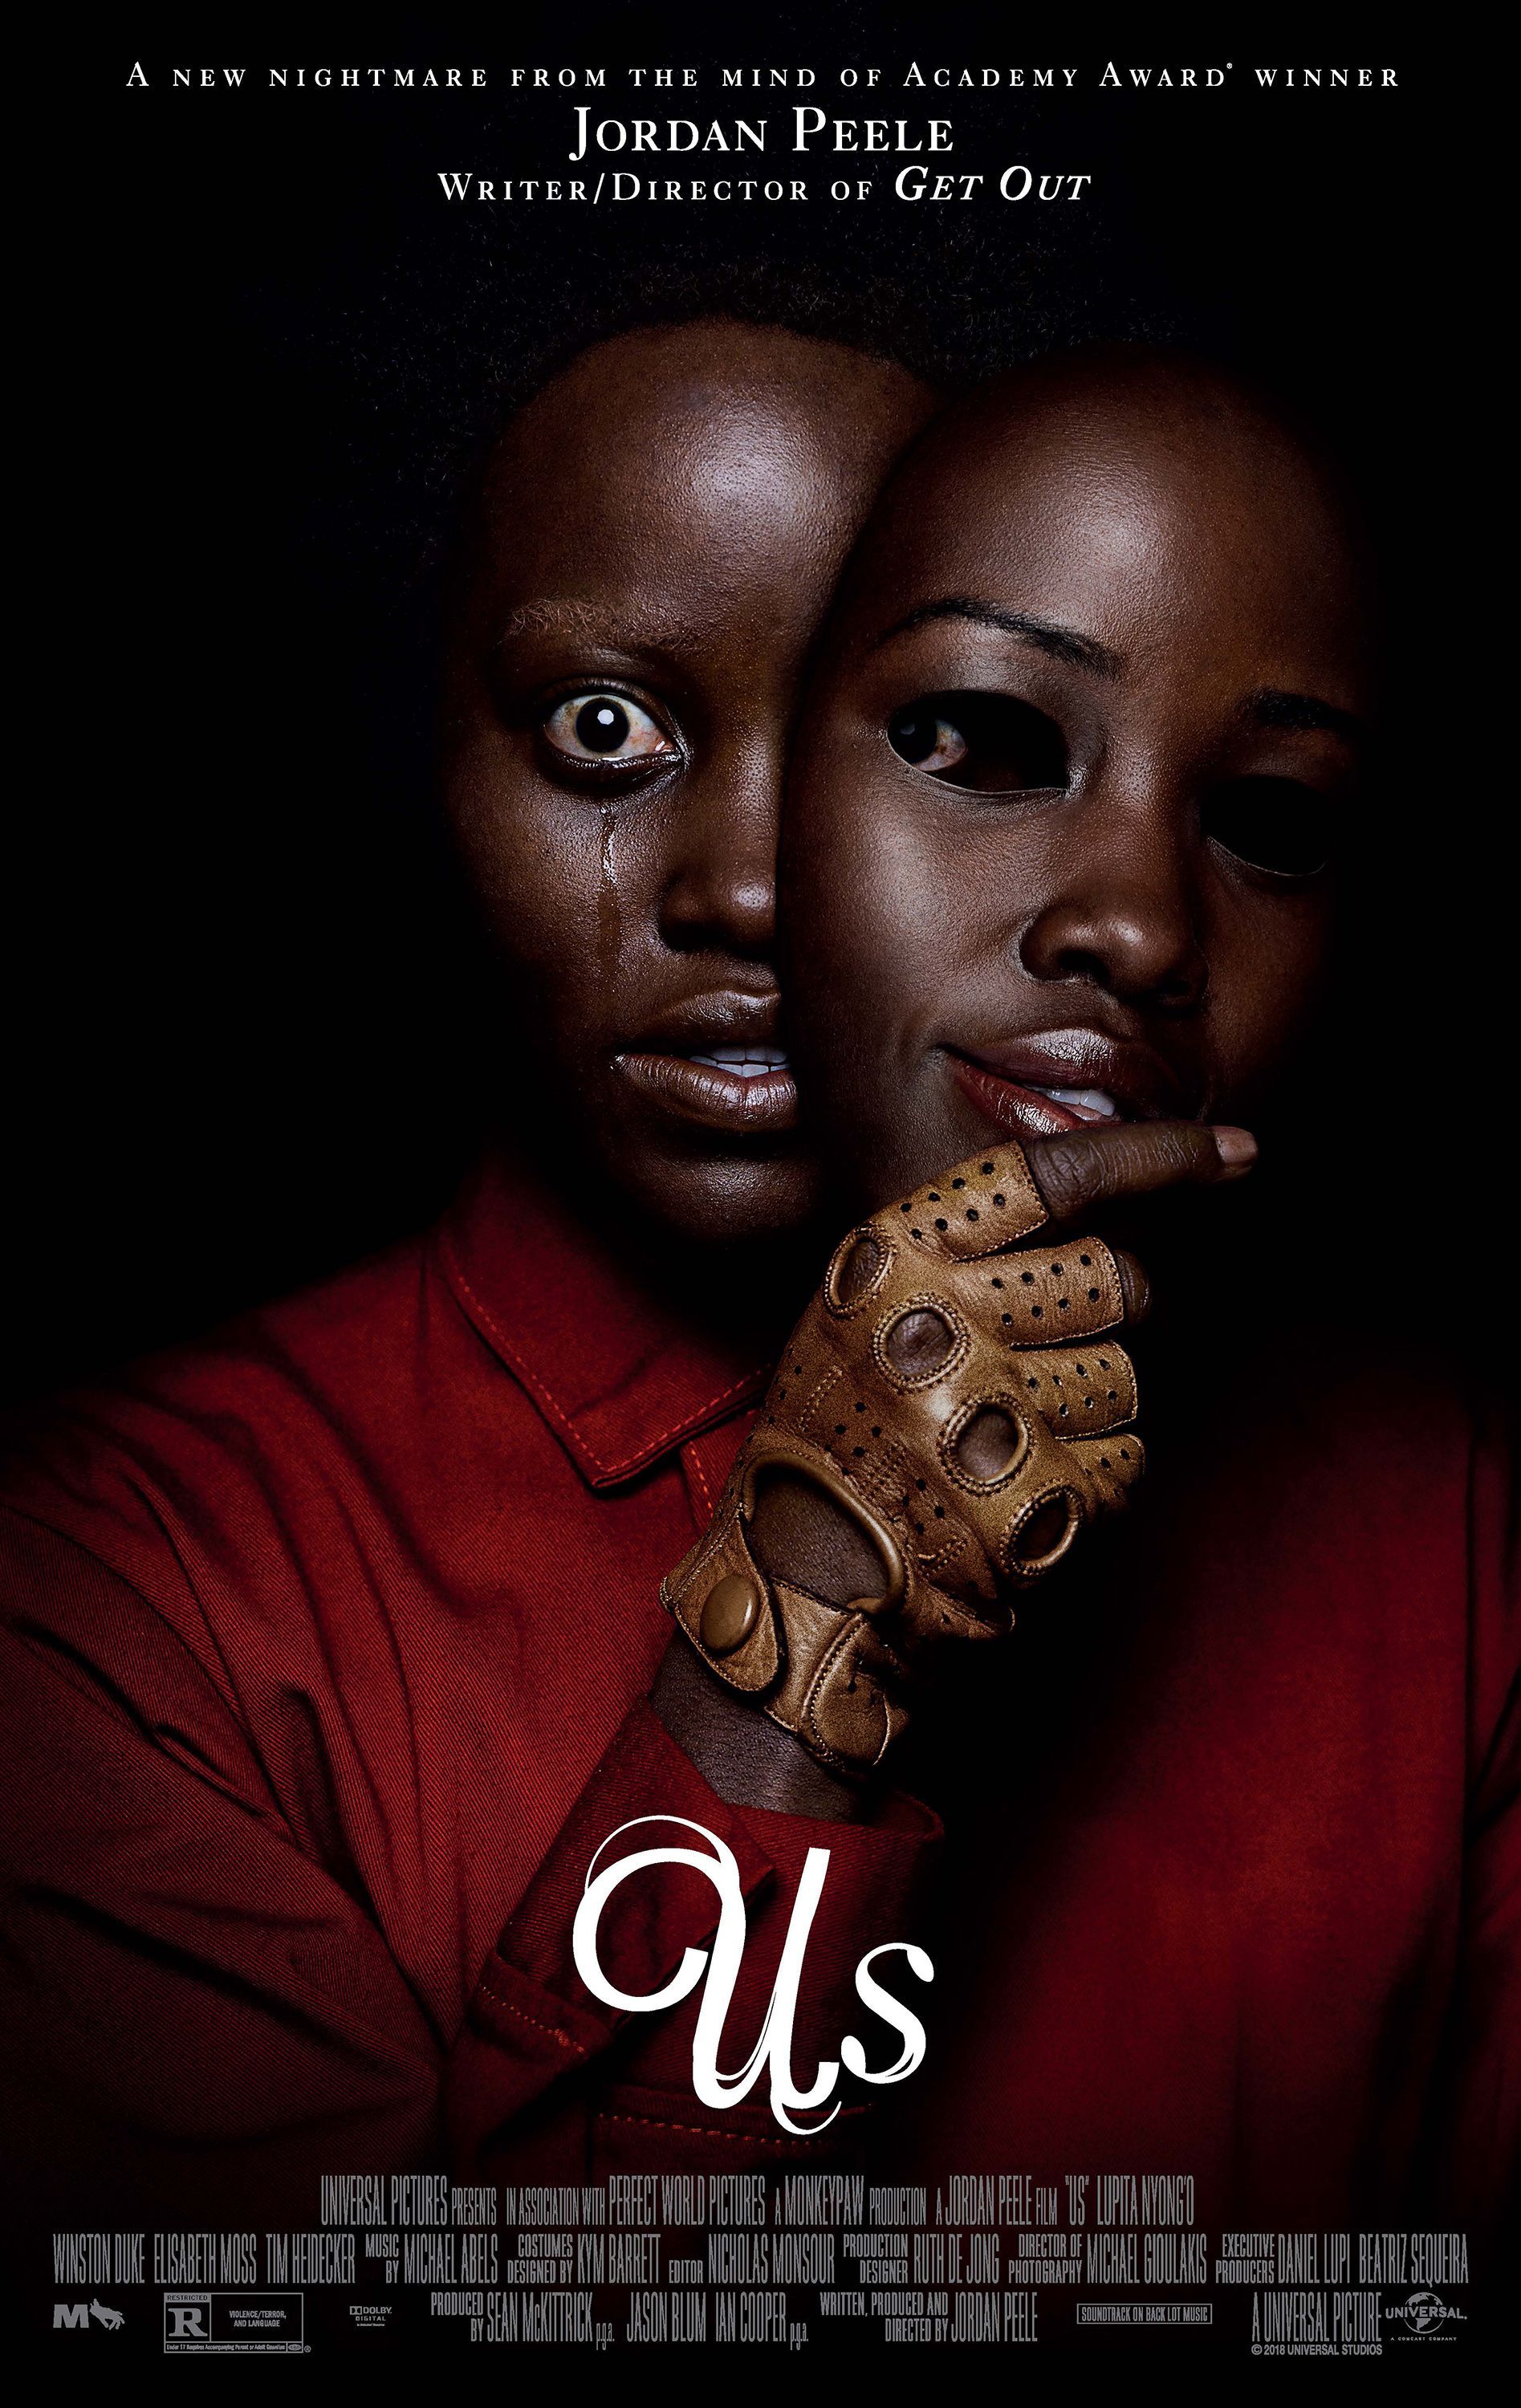 The poster for the 2019 movie Us showing Lupita Nyong'o